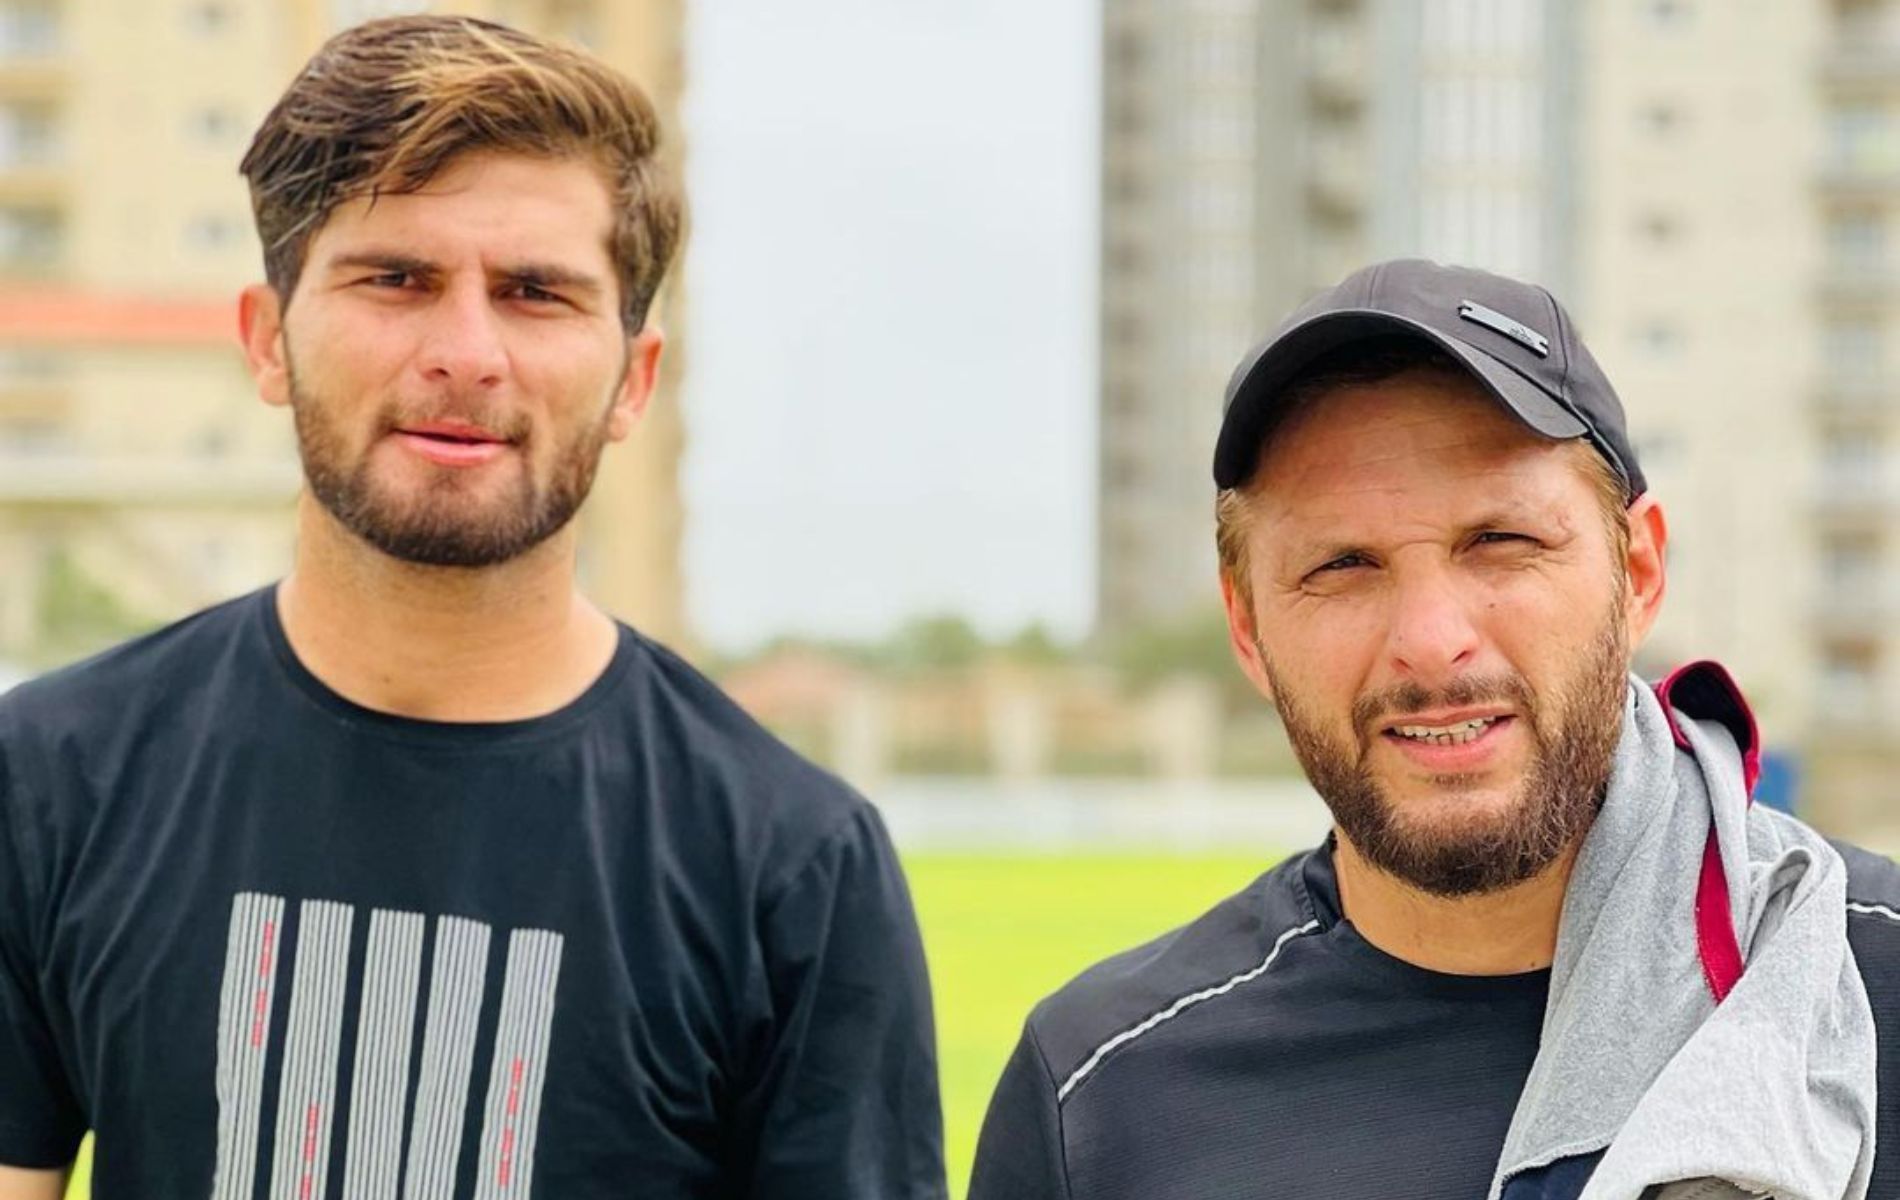 Shaheen Afridi (L) with Shahid Afridi. (Pic: Instagram)